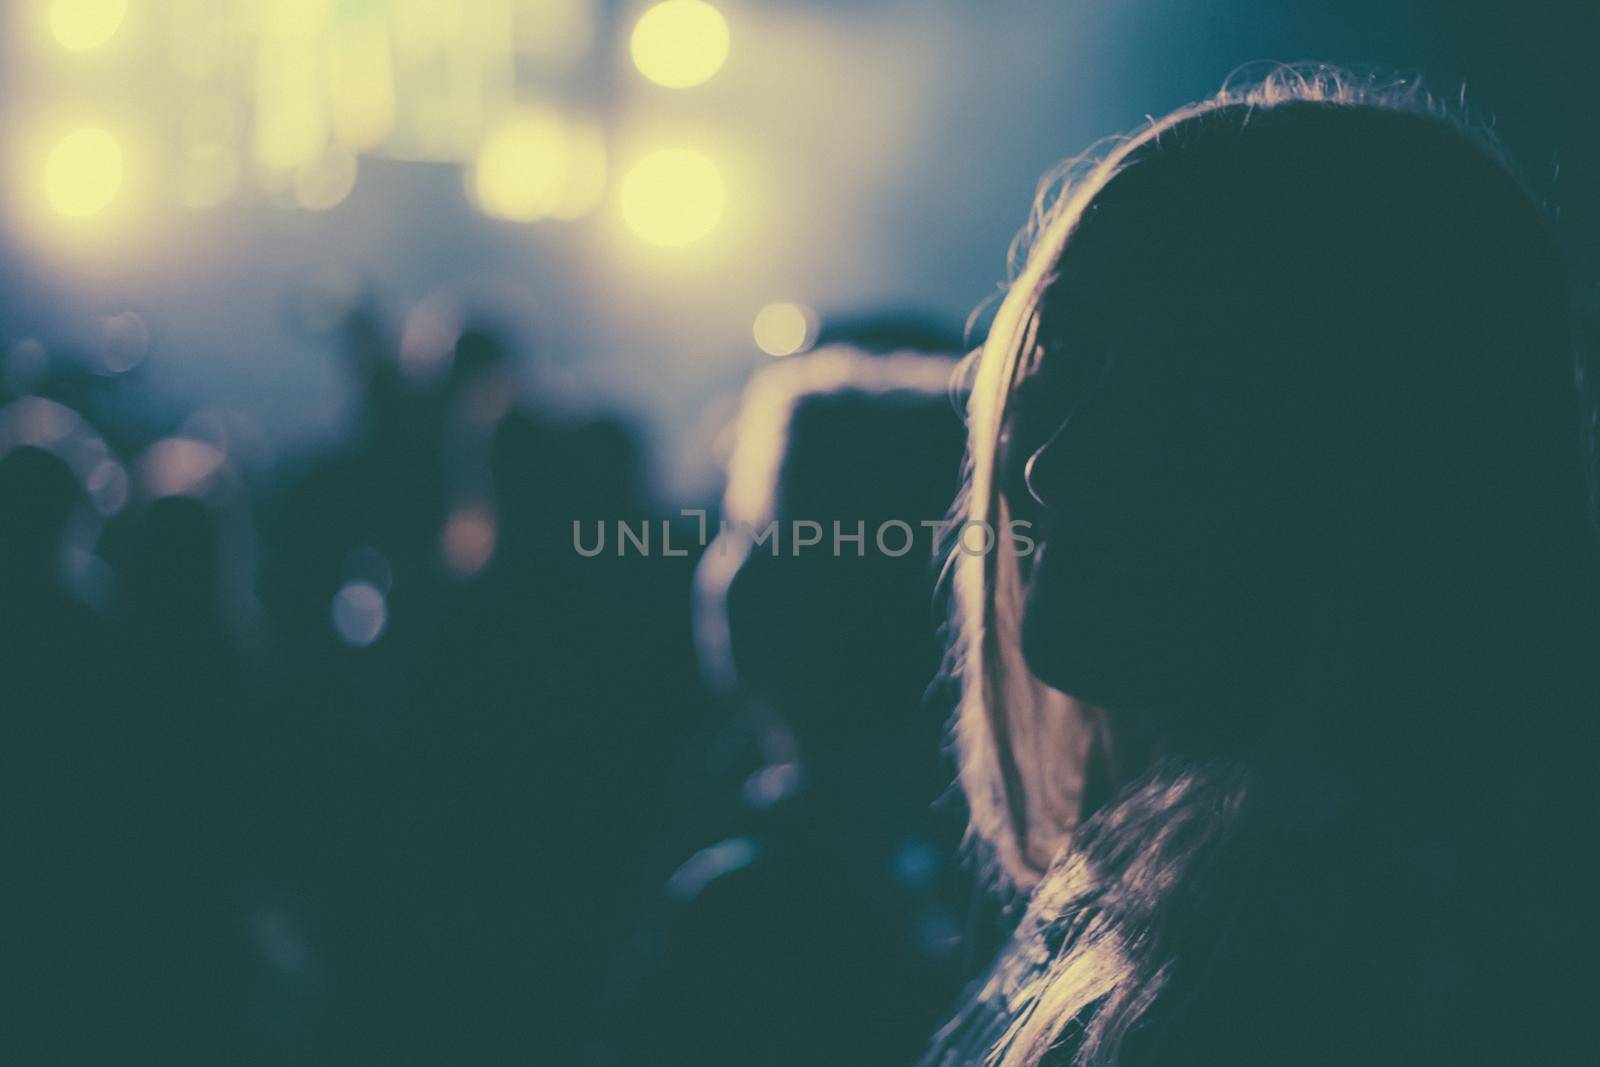 silhouettes of a girl on a New Year's holiday in neon light, blurred background